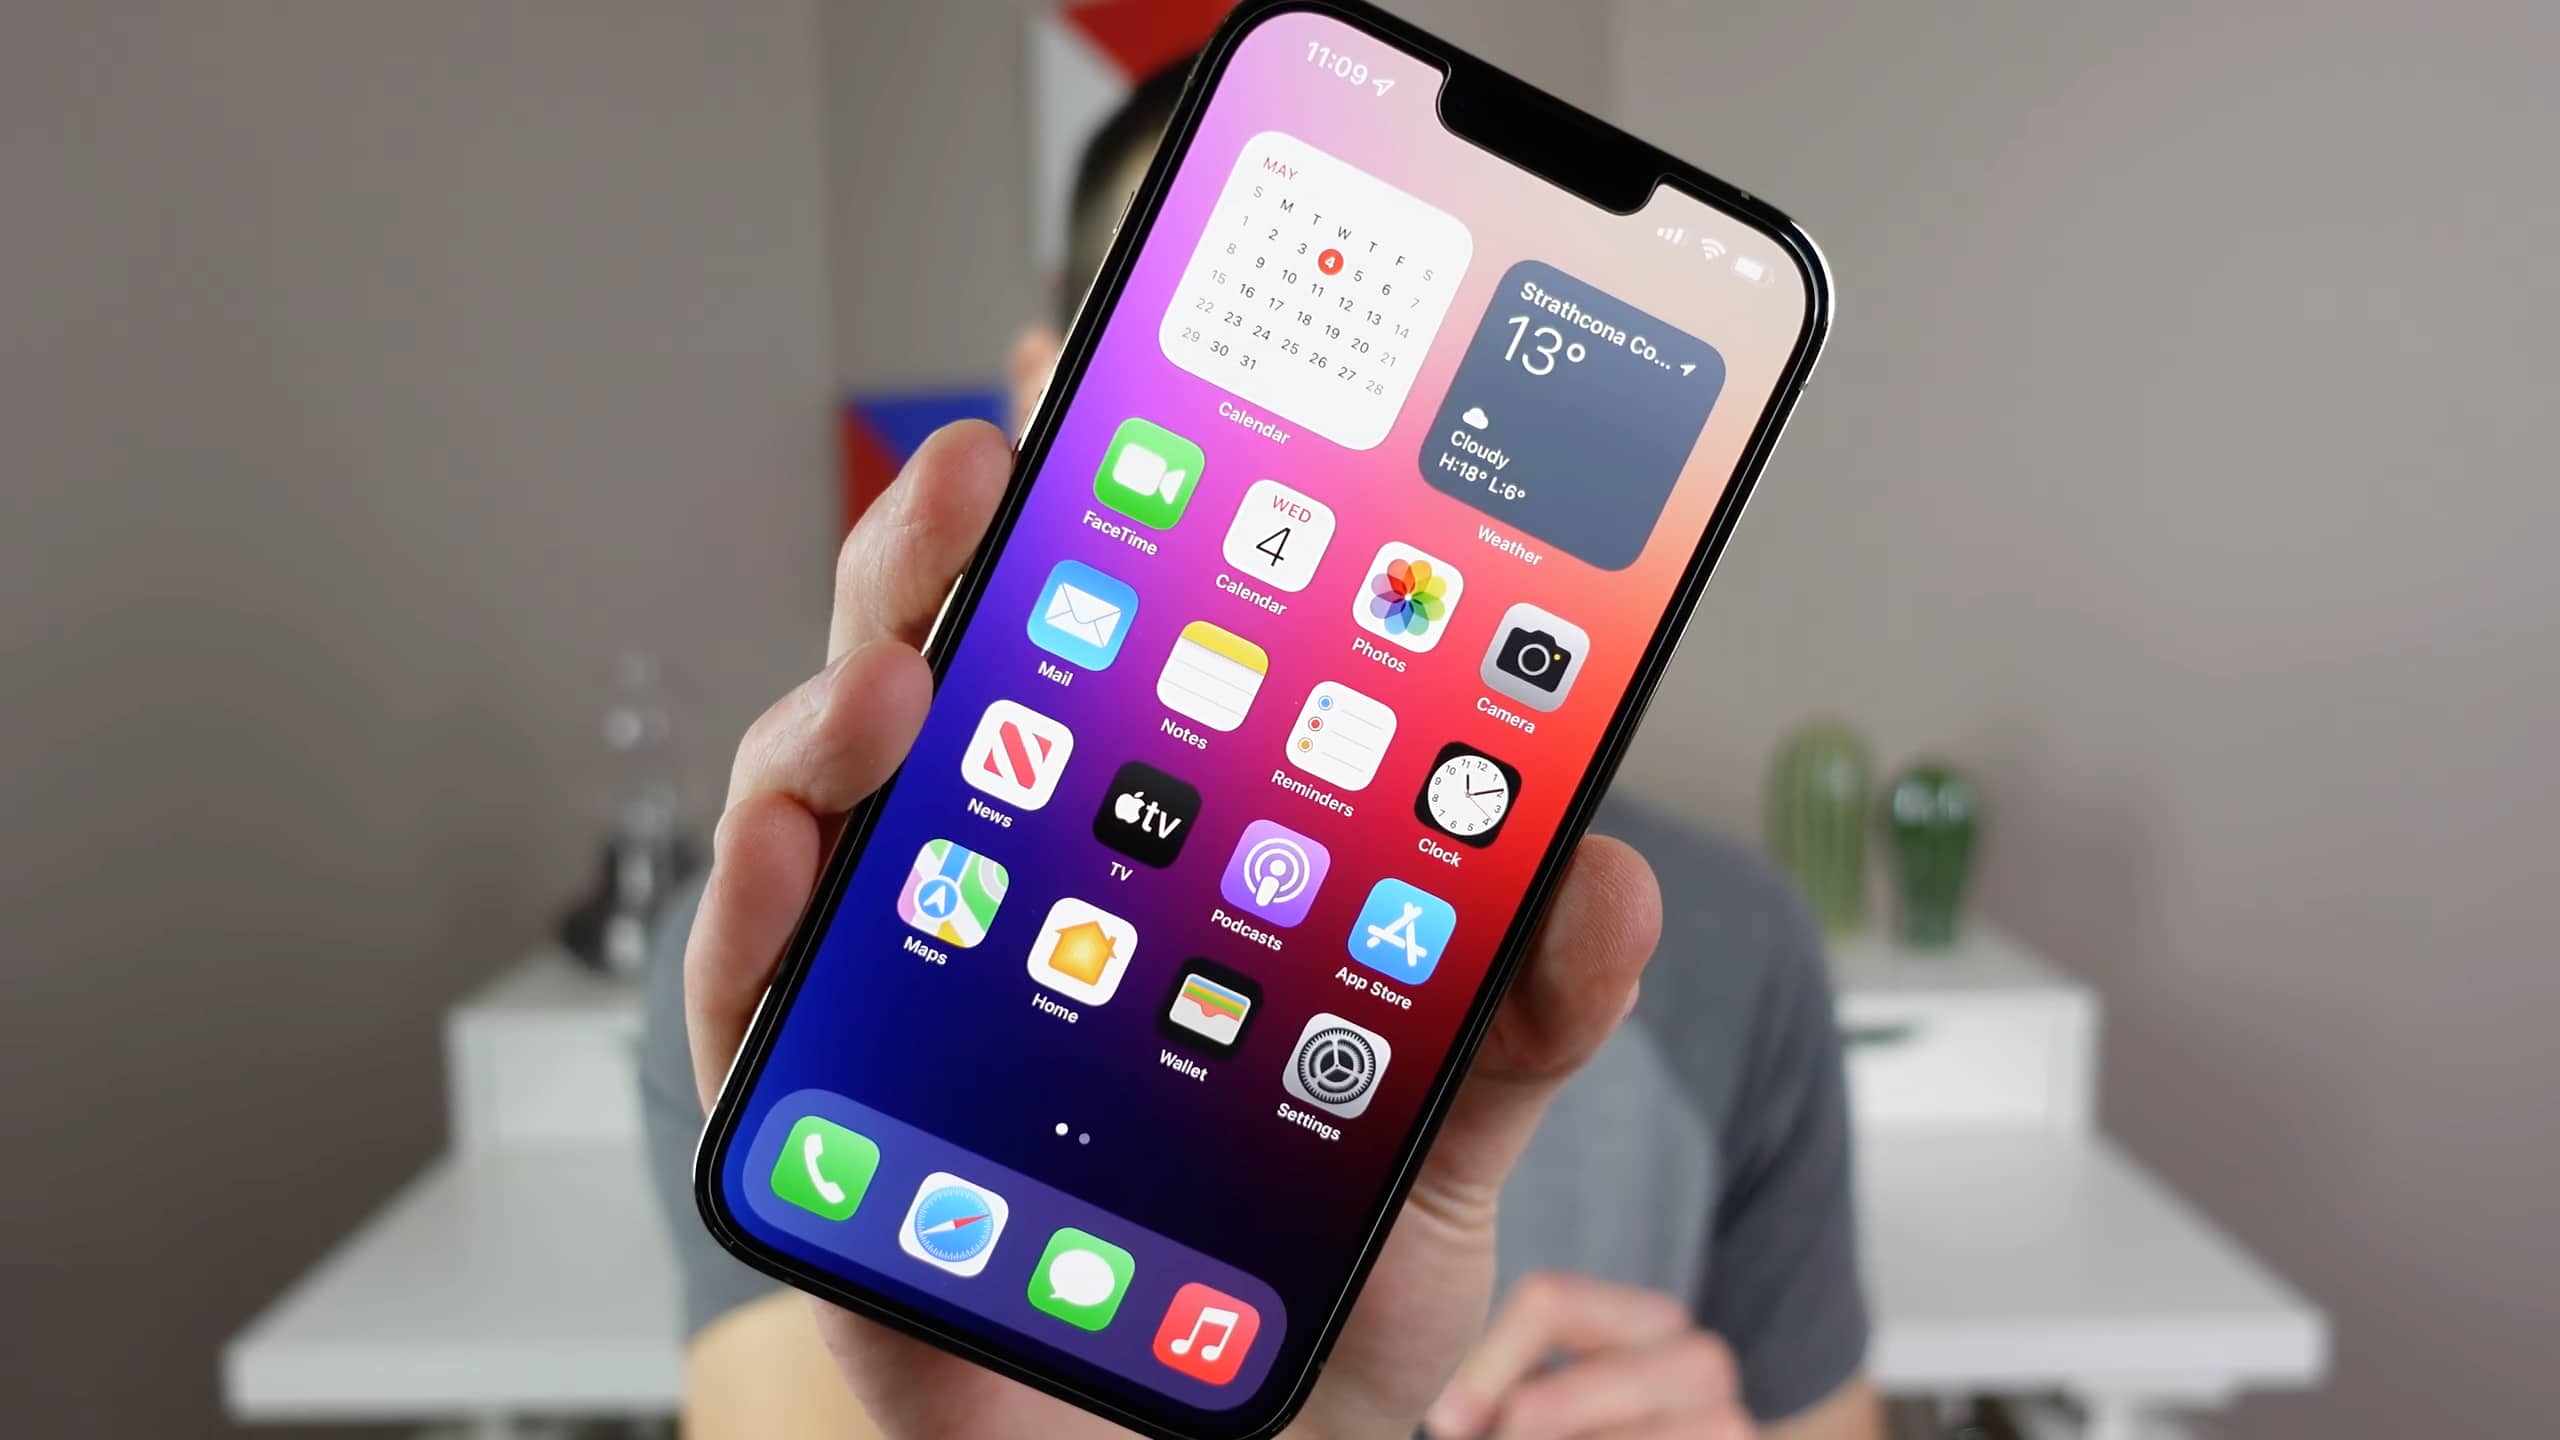 Apple's iPhone 13 Pro Max with home screen widgets and app icons is being held in front of the camera in this still image screenshotted from iDownloadBlog's video walkthrough covering 15 iPhone settings designed for optimal experience